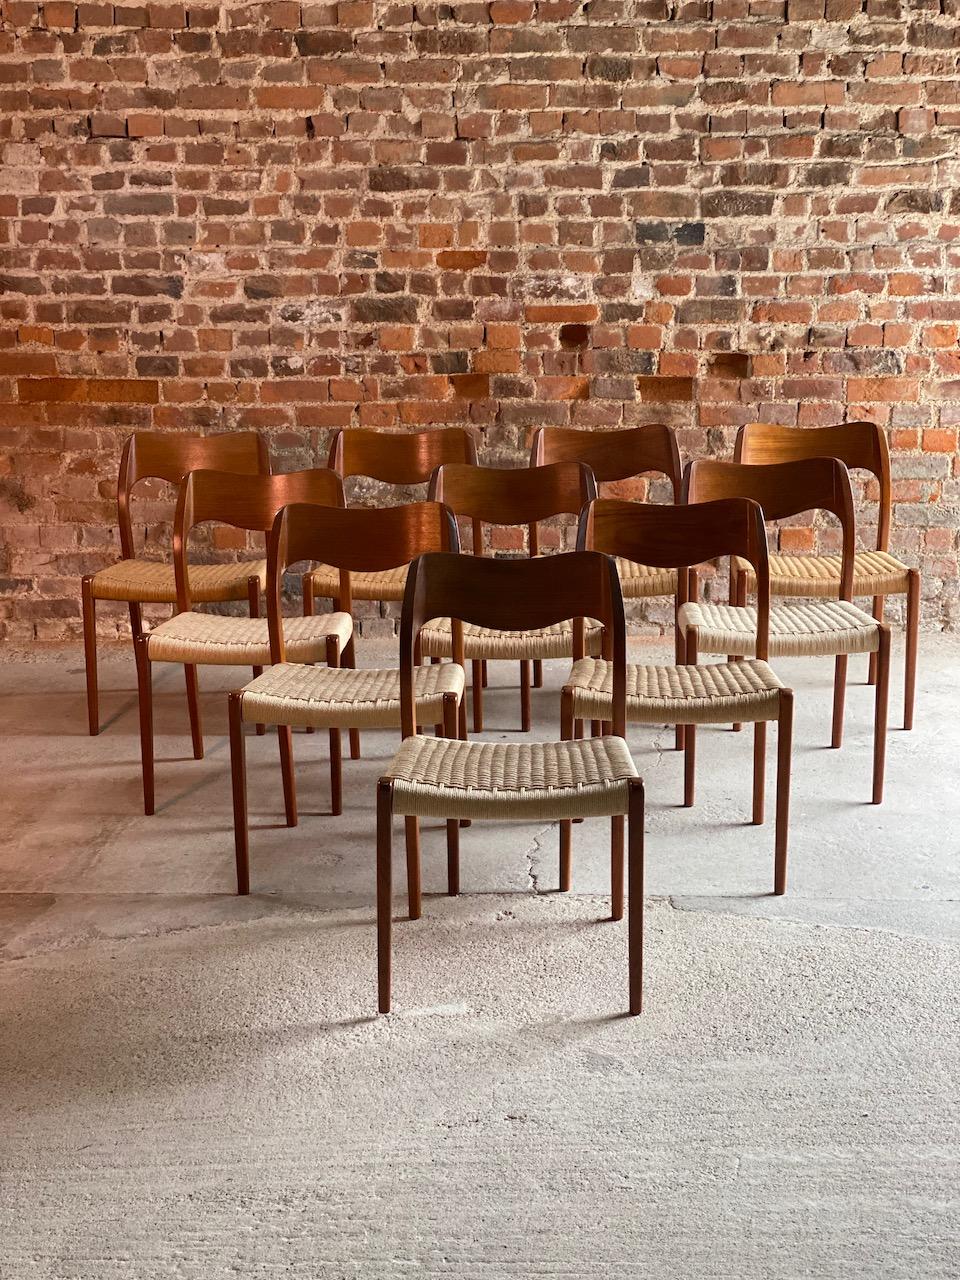 Moller model 71 dining chairs set of 10 in teak and paper cord, 1960s, set of 3

Fabulous set of ten model 71 chairs by Danish designer Niels Otto Møller circa 1960, and manufactured by JL Møllers Møbelfabrik chairs featuring frames made of solid